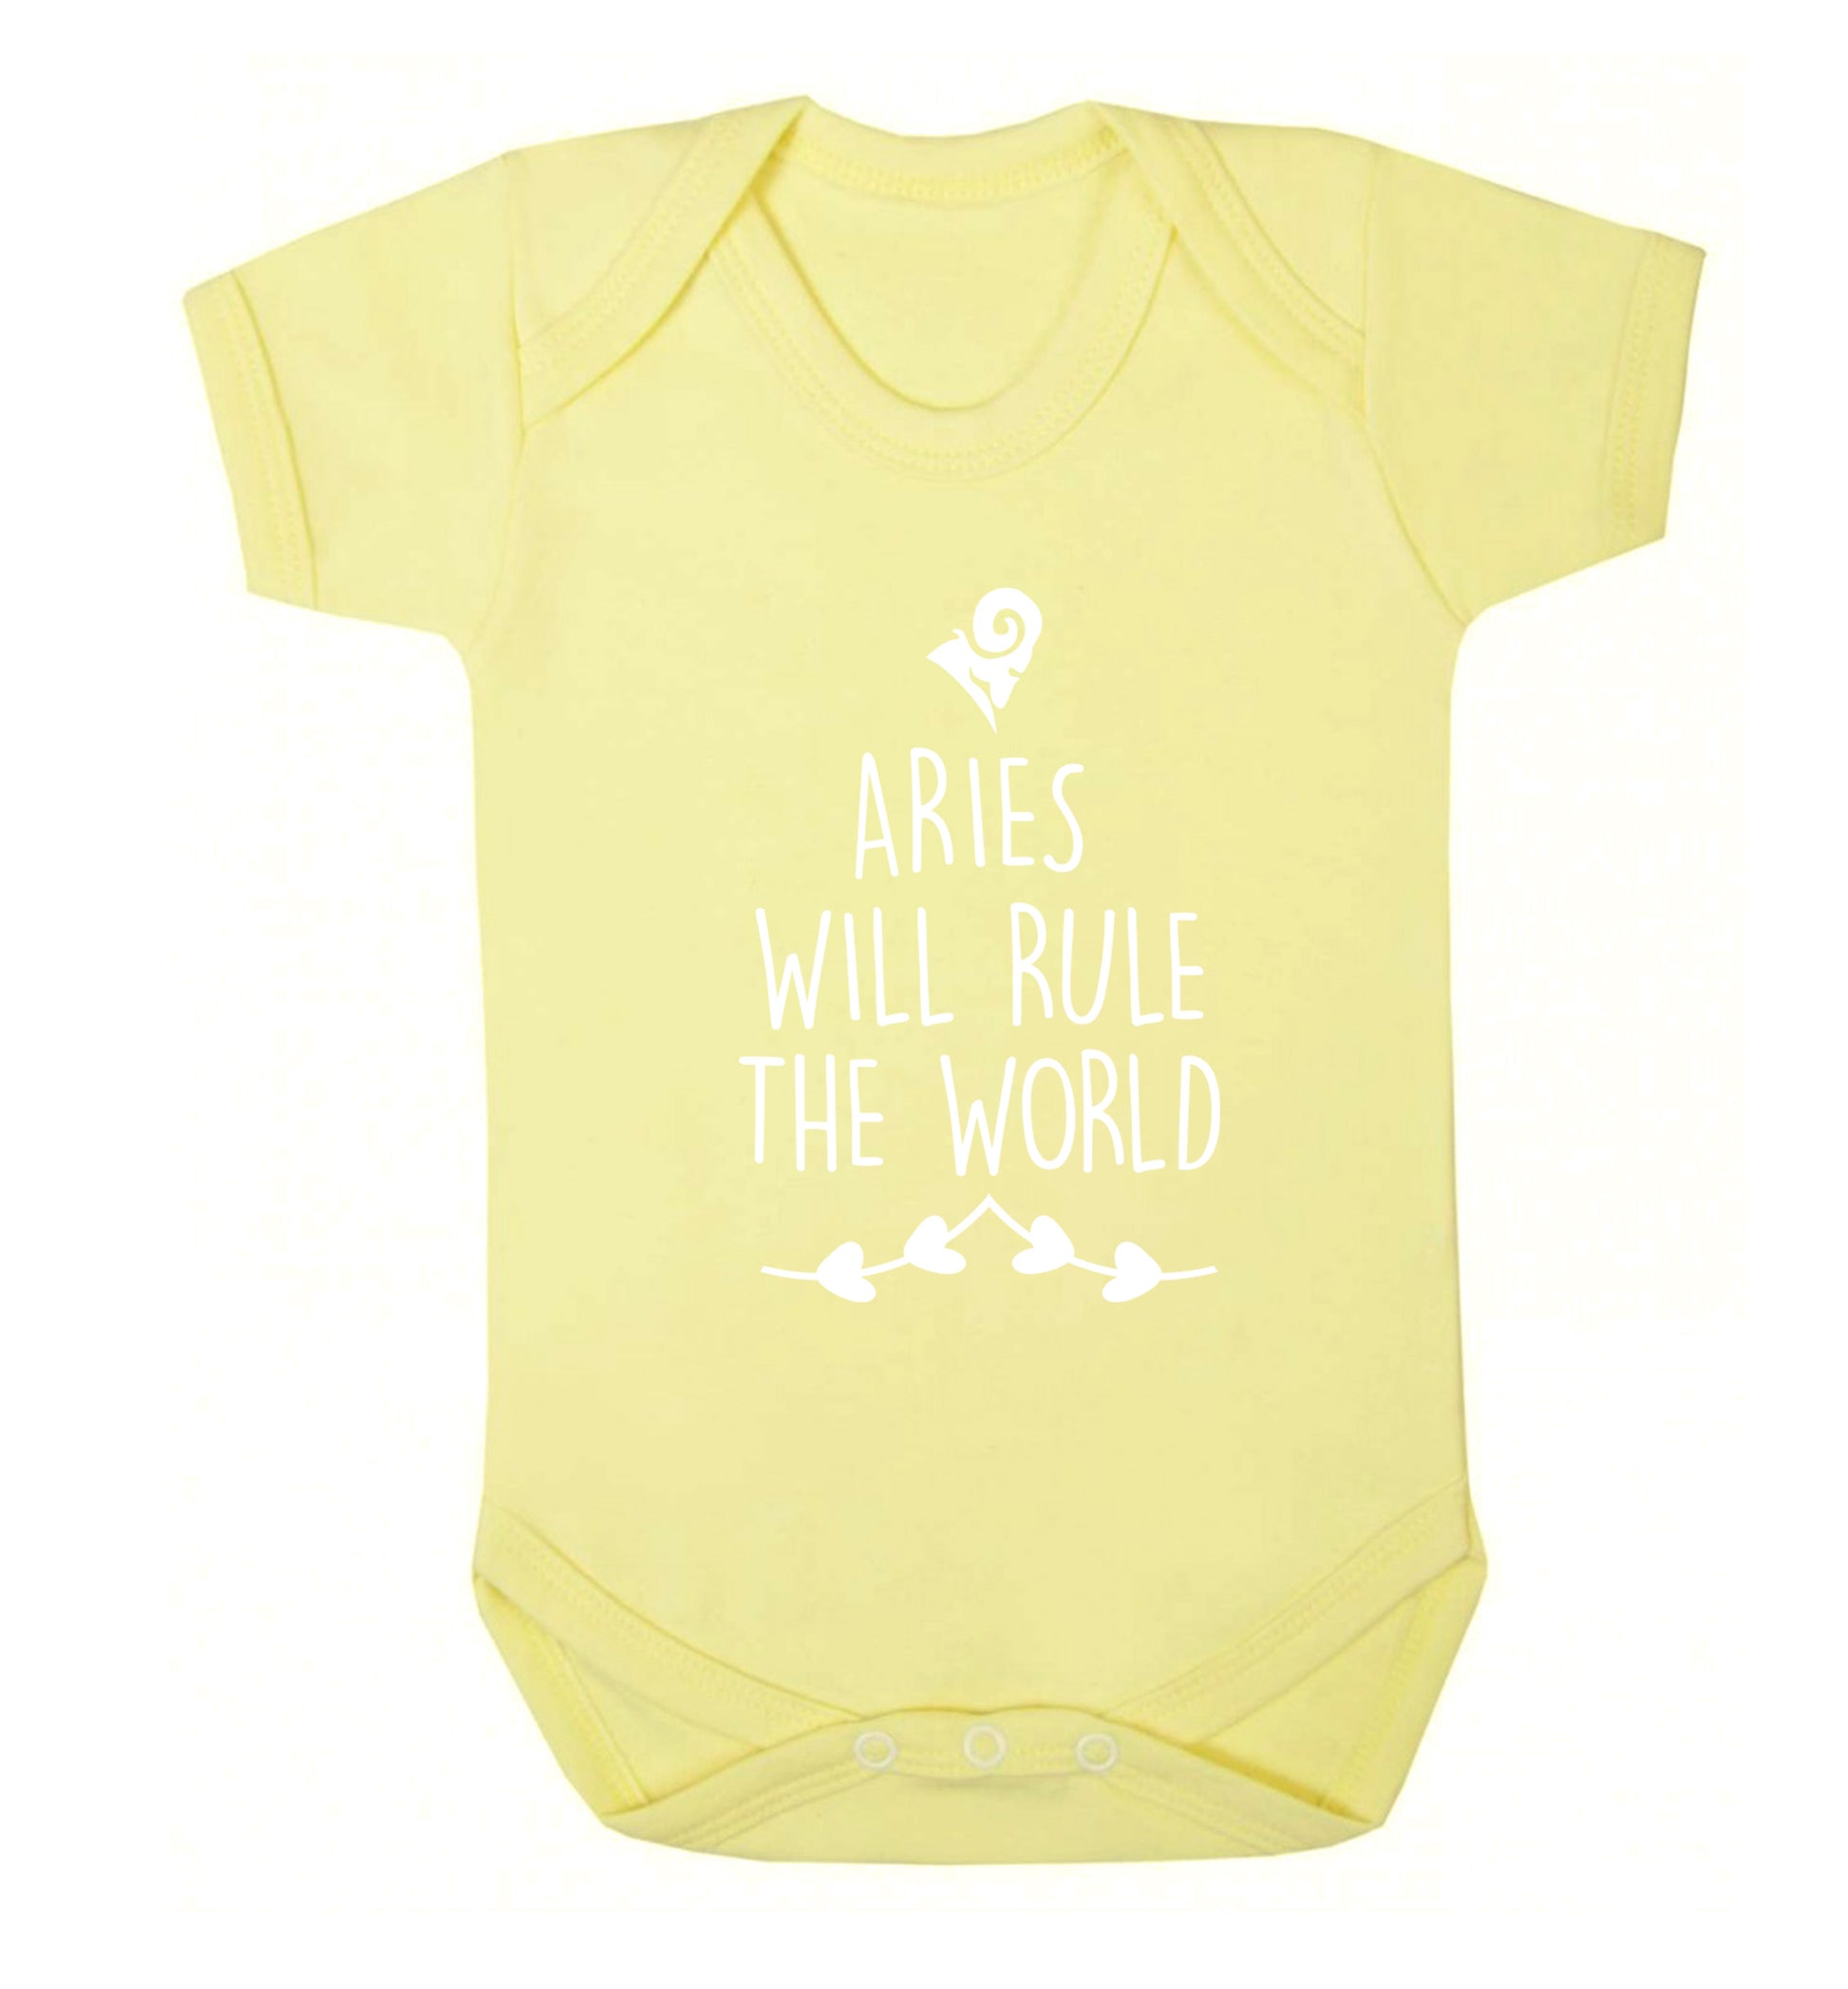 Aries will rule the world Baby Vest pale yellow 18-24 months